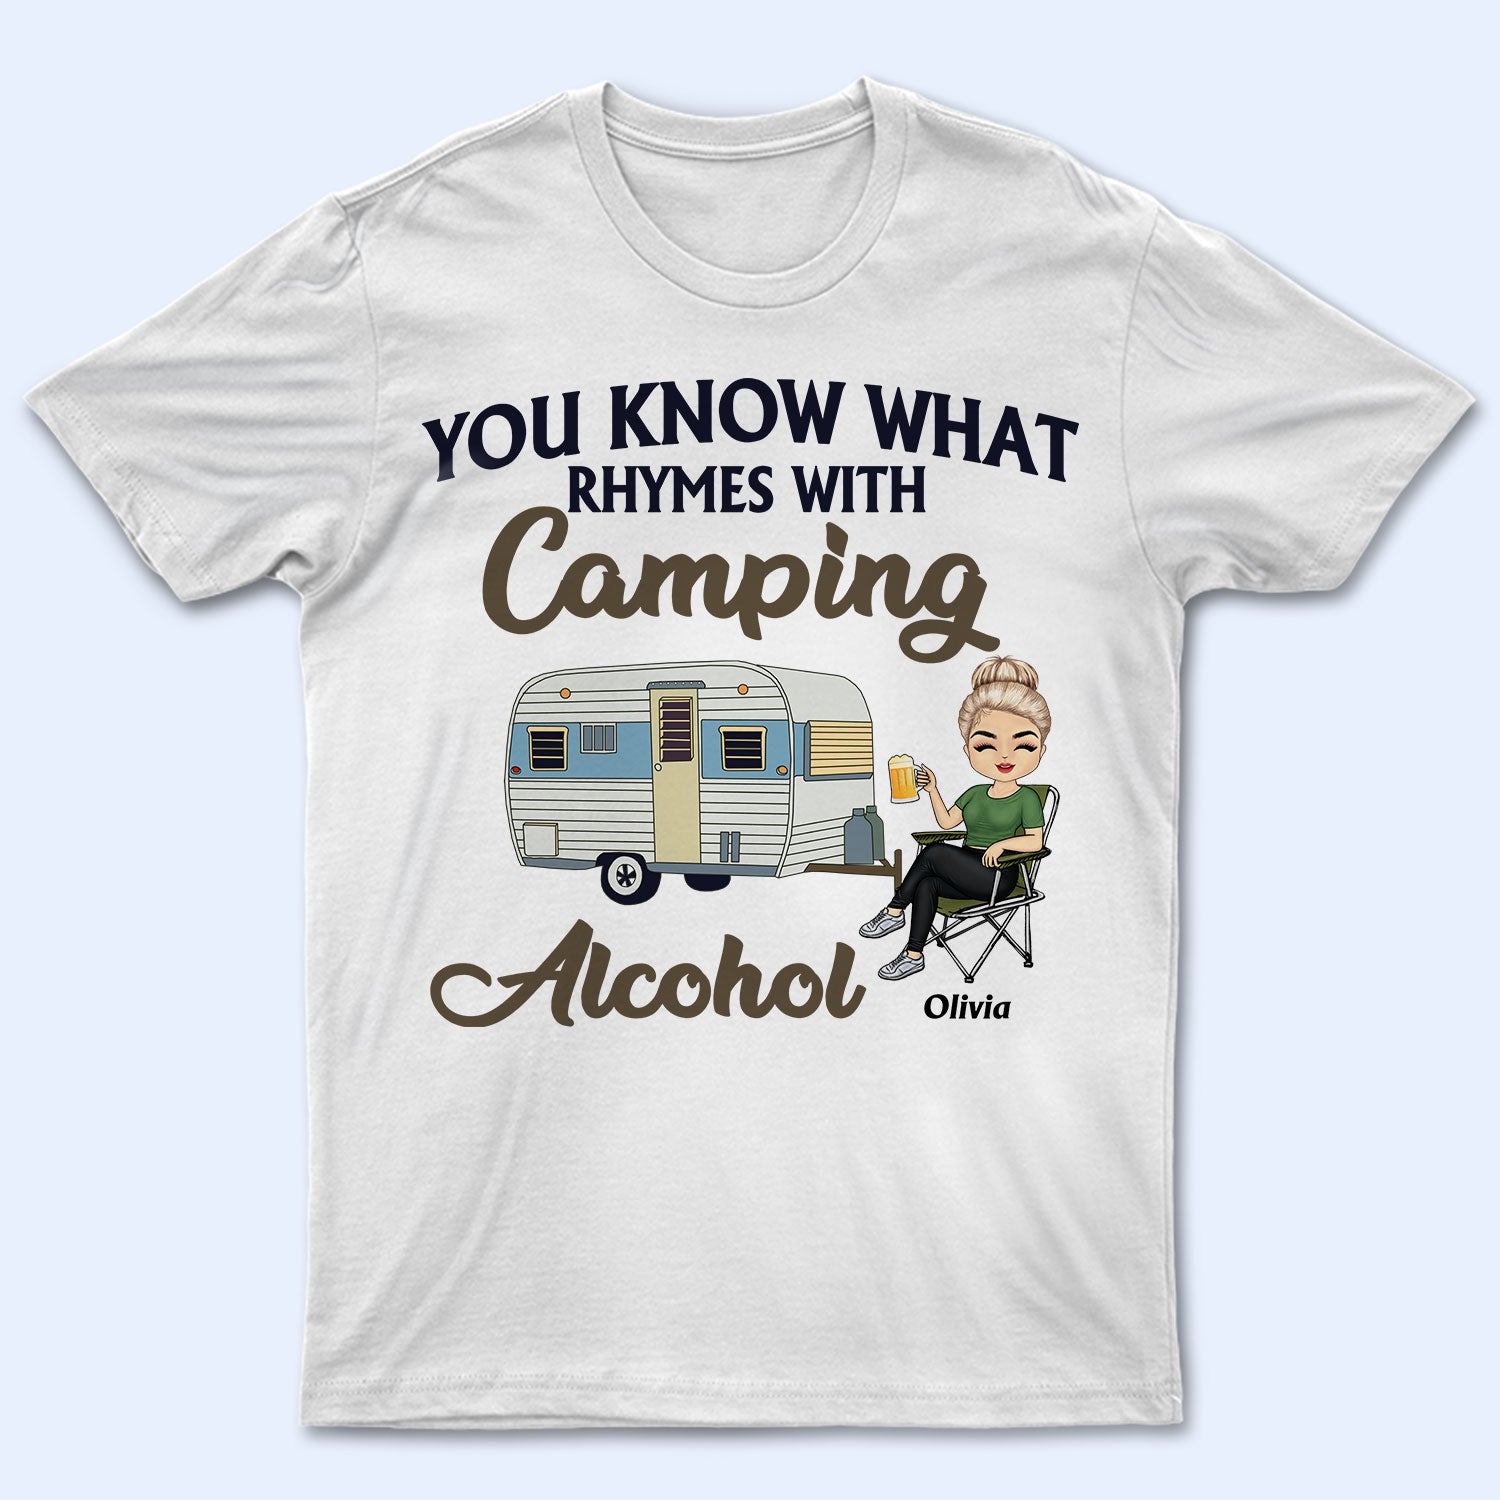 You Know What Rhymes With Camping Alcohol - Gift For Camping Lovers - Personalized Custom T Shirt